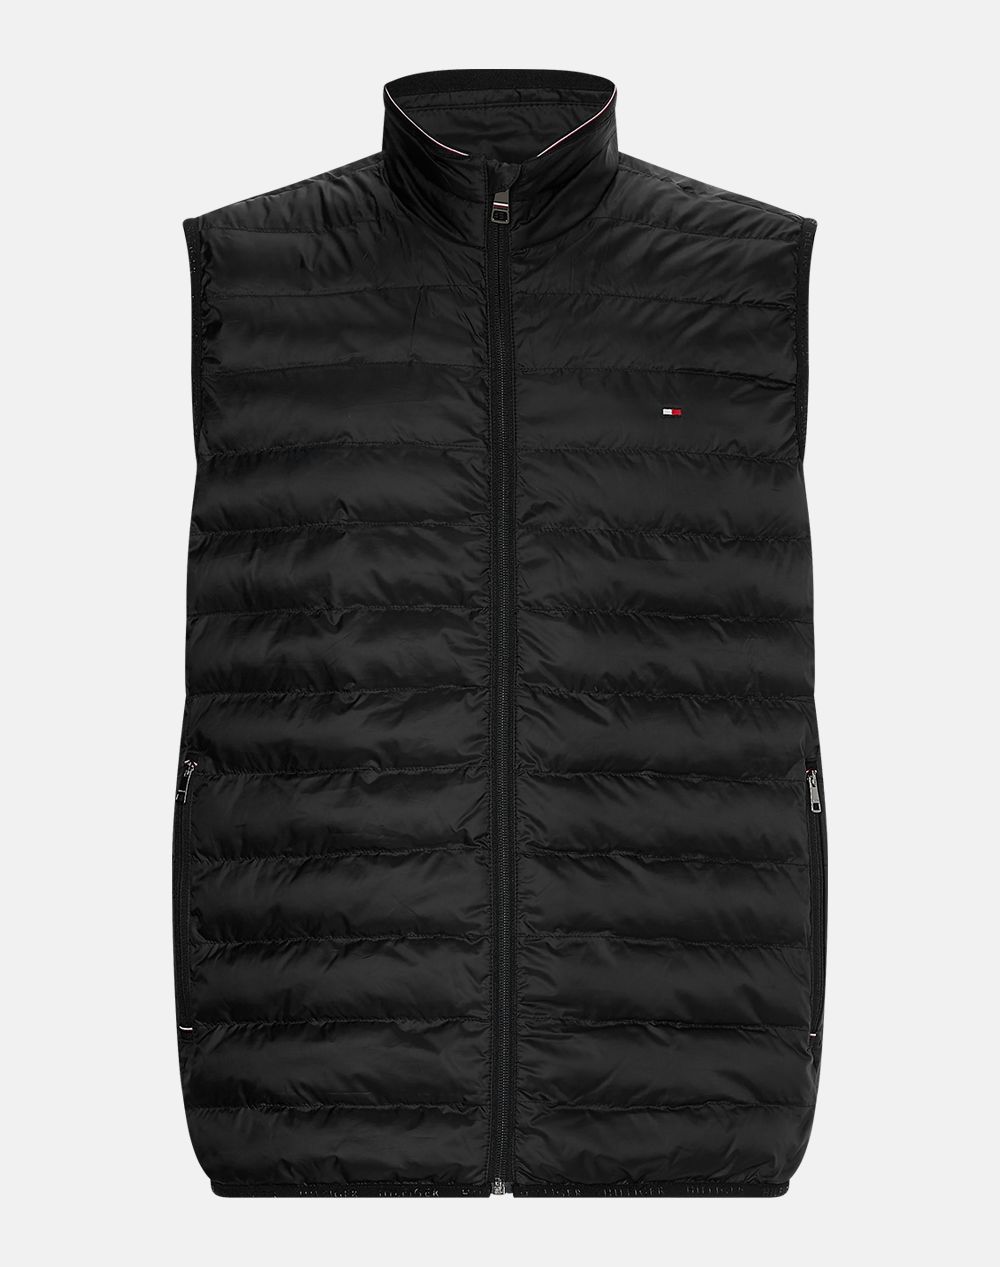 TOMMY HILFIGER BT-PACKABLE RECYCLED VEST-B MW0MW35131-BDS Black 3820ATOMM3110017_9371